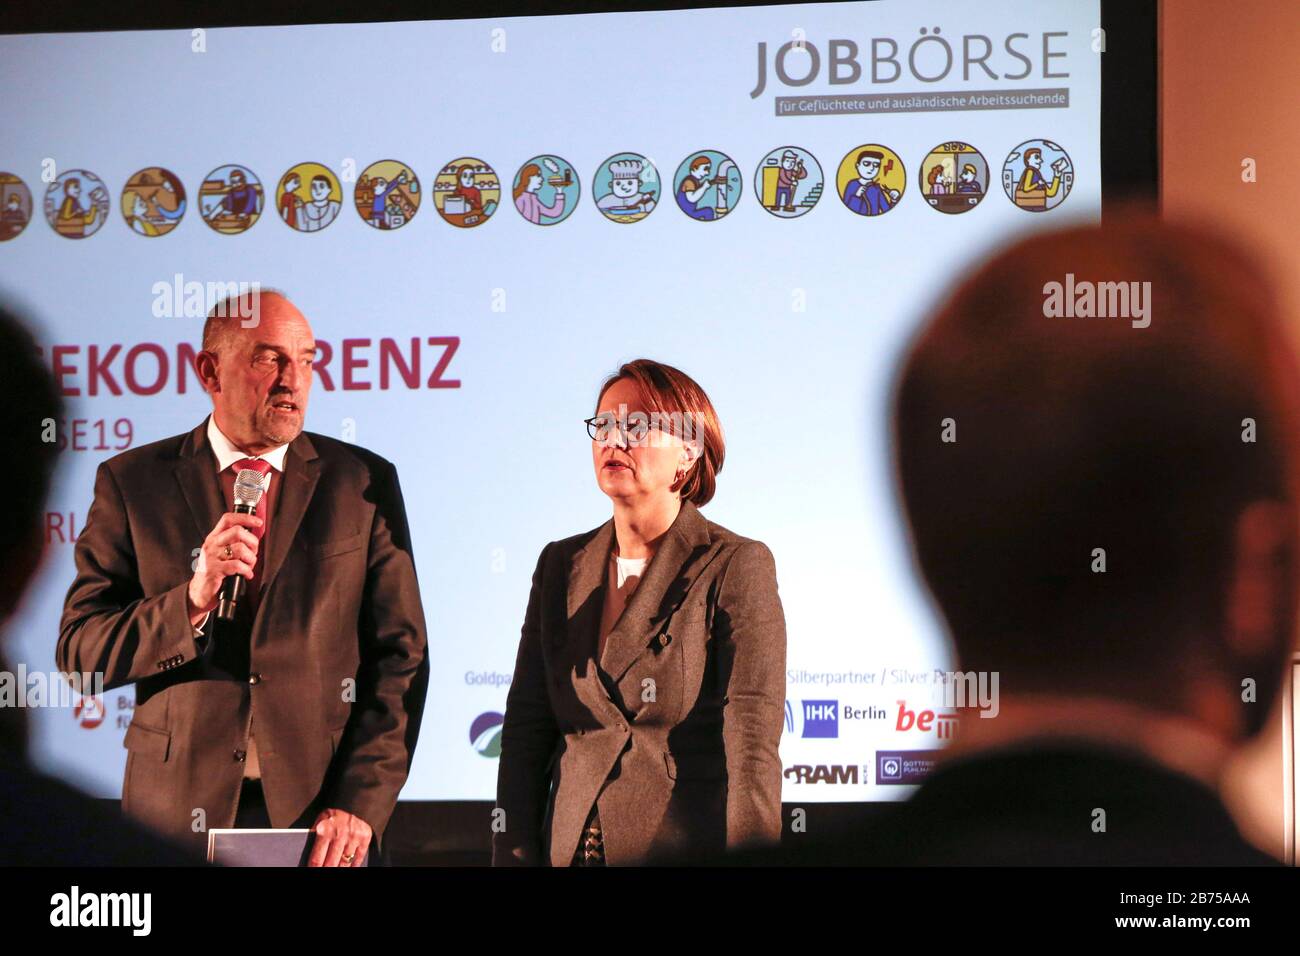 Detlef Scheele, Chief Executive Officer of the Federal Labour Agency and Annette Widmann-Maus, Integration Commissioner of the Federal Government at the job exchange in Berlin on 28 January 2019. Previously, both signed a cooperation agreement to improve the integration of migrants into the labour market. [automated translation] Stock Photo